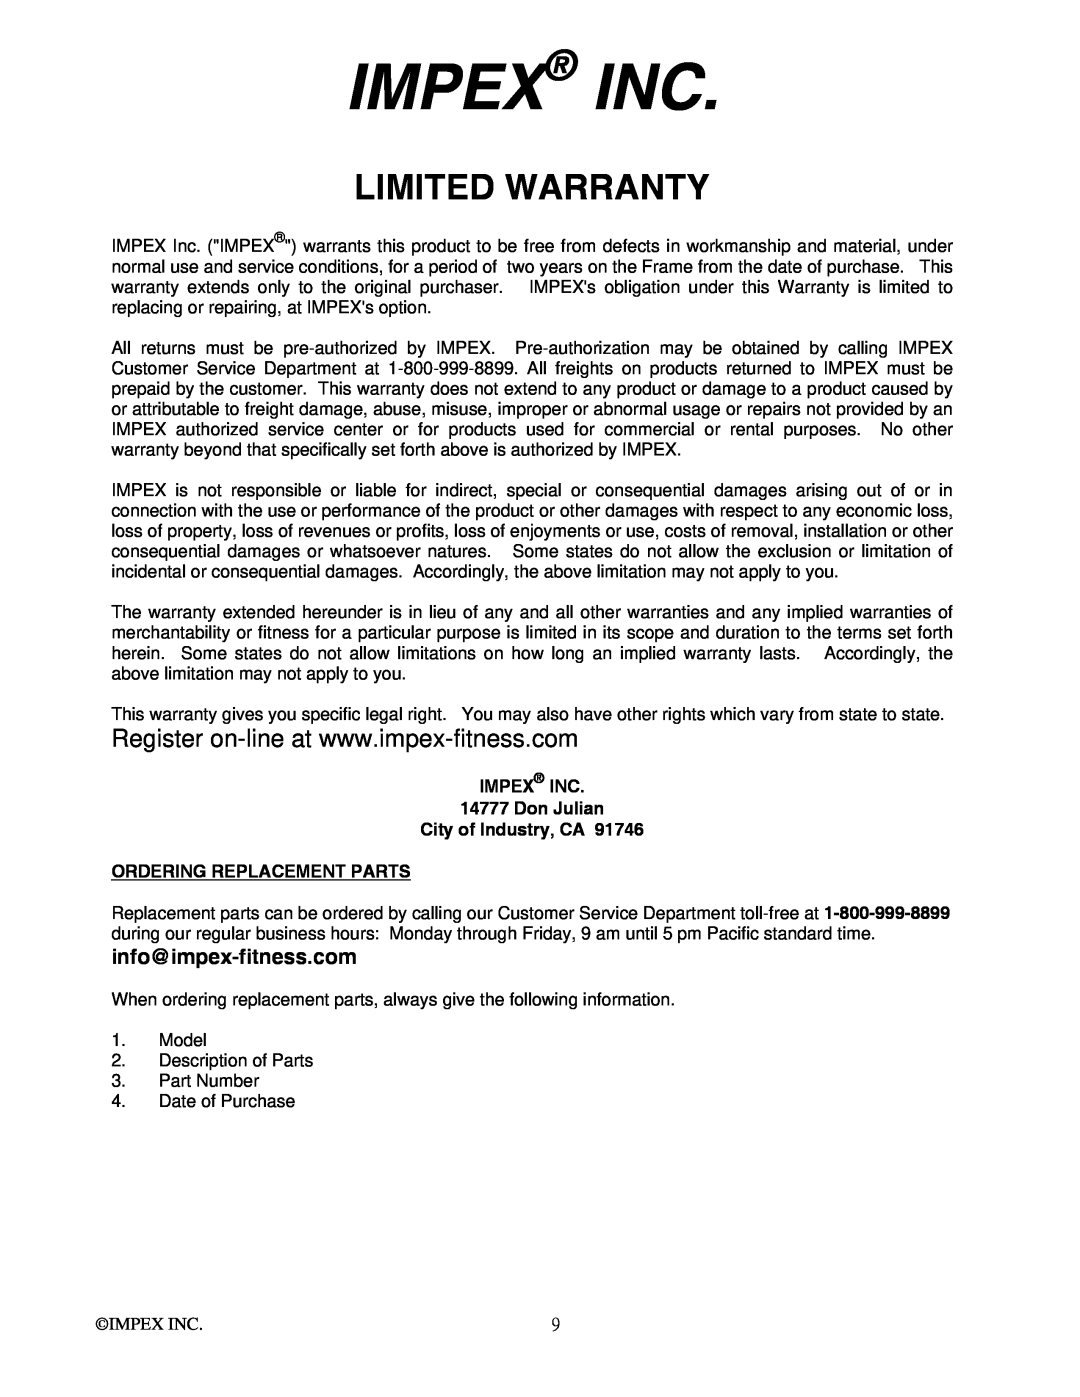 Impex SAG-44.0 Impex Inc, Limited Warranty, IMPEX INC 14777 Don Julian City of Industry, CA, Ordering Replacement Parts 